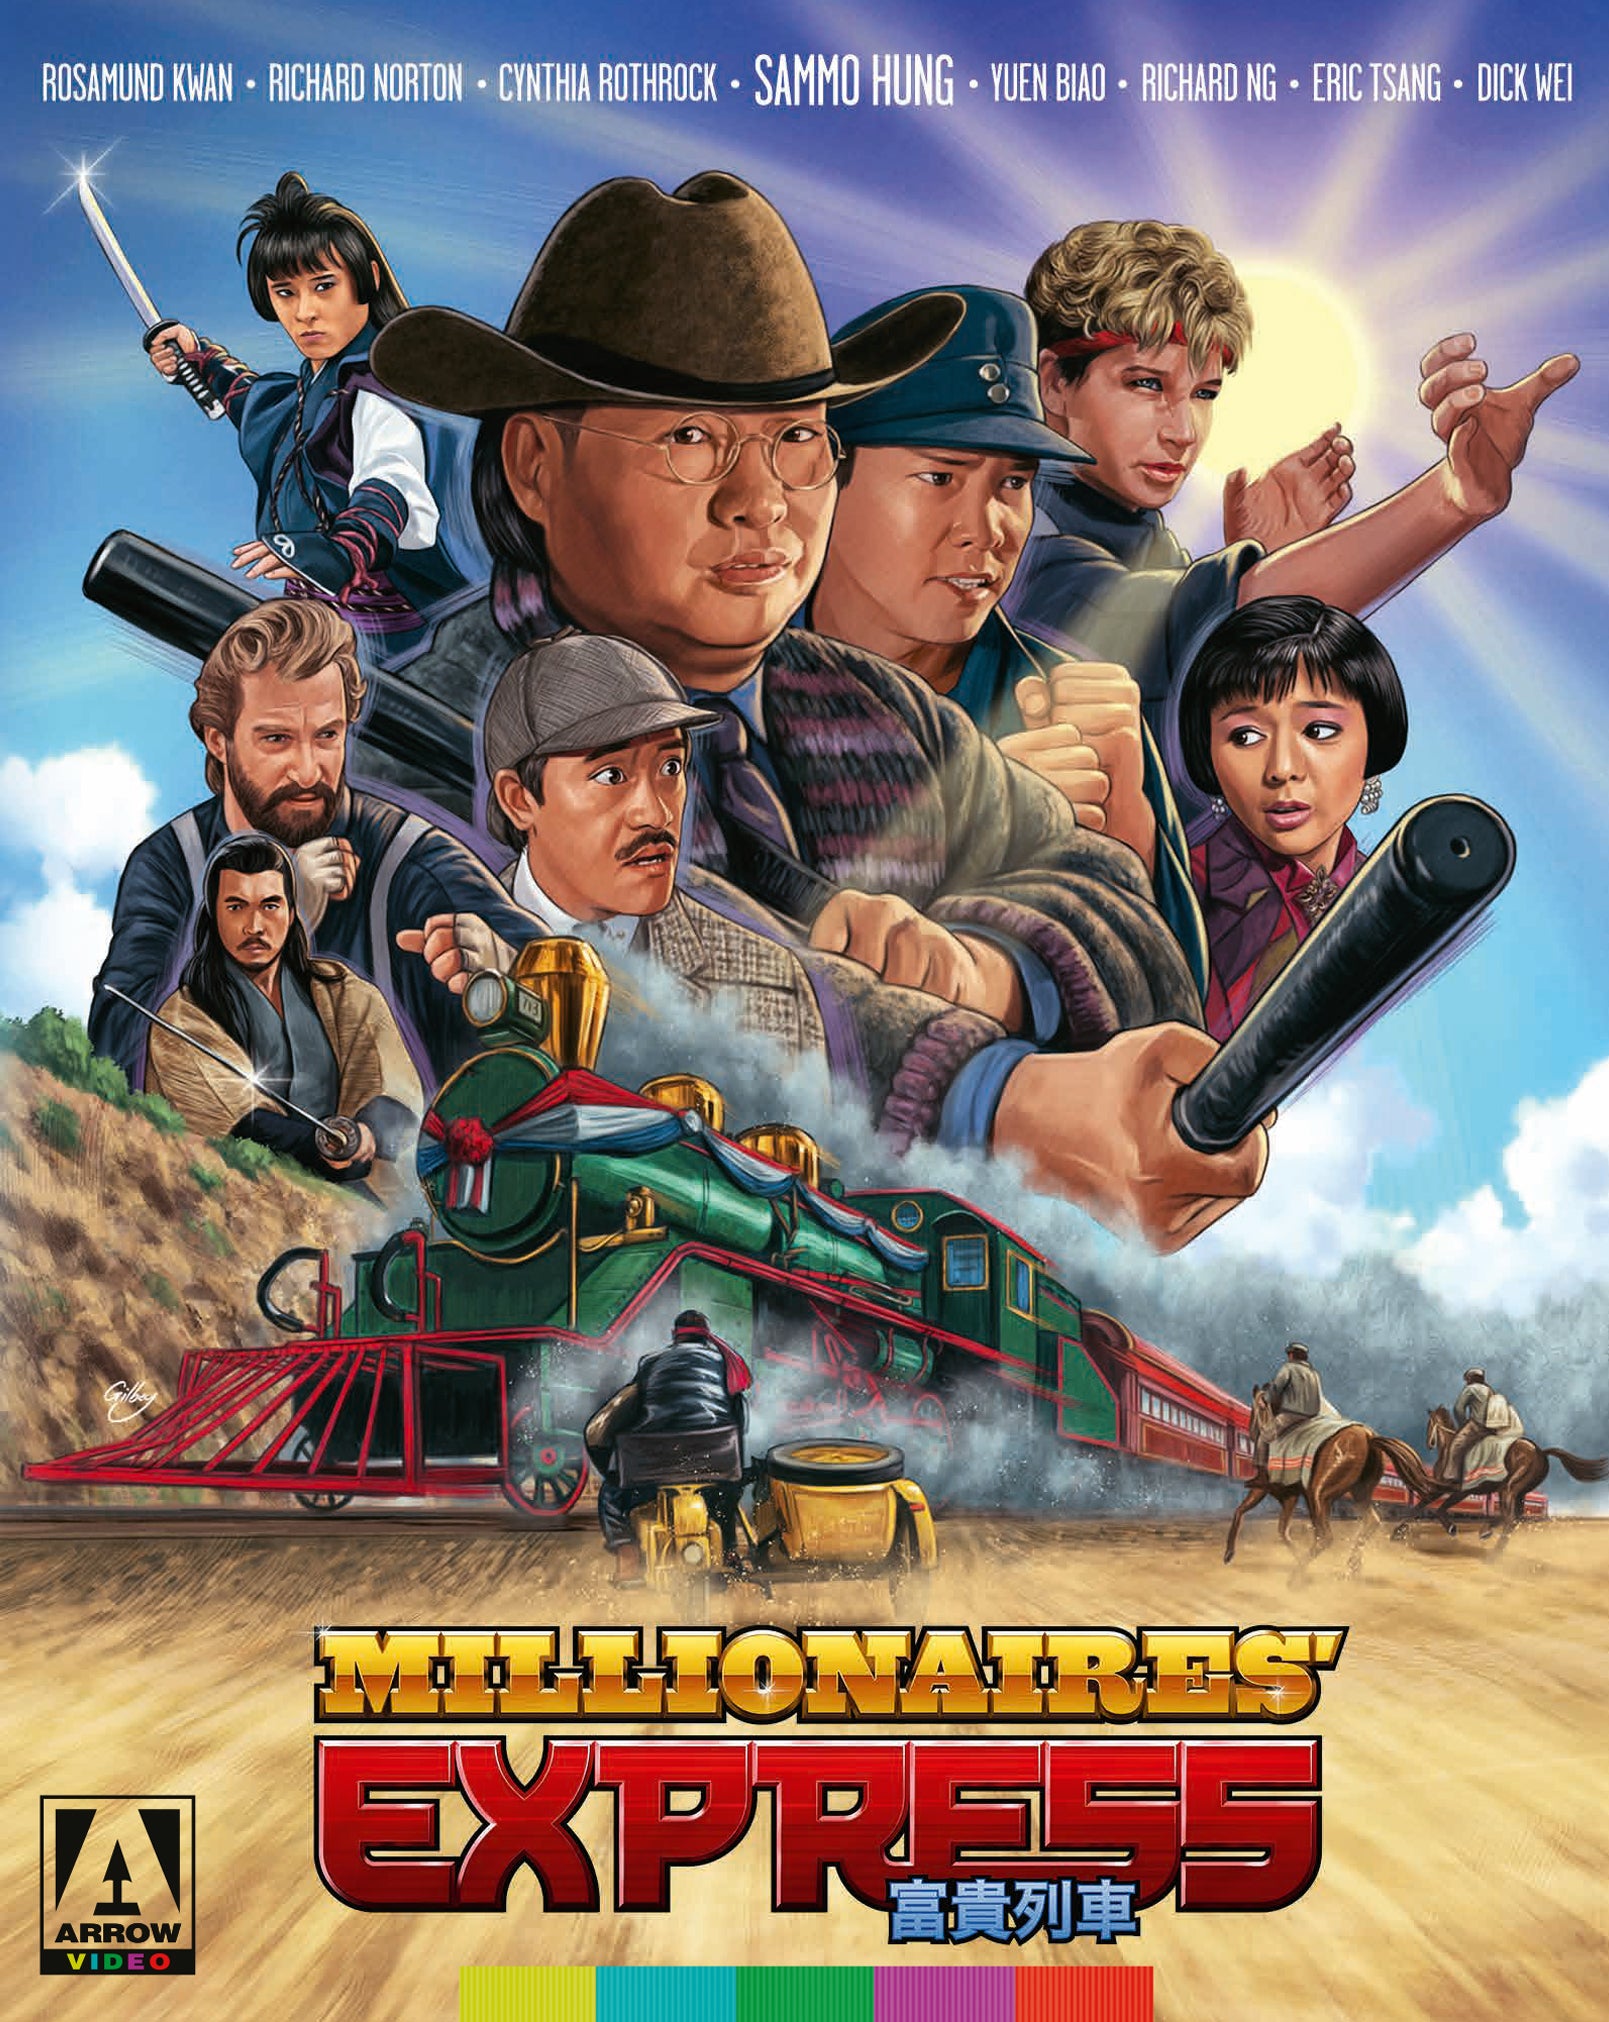 MILLIONAIRES' EXPRESS (LIMITED EDITION) BLU-RAY